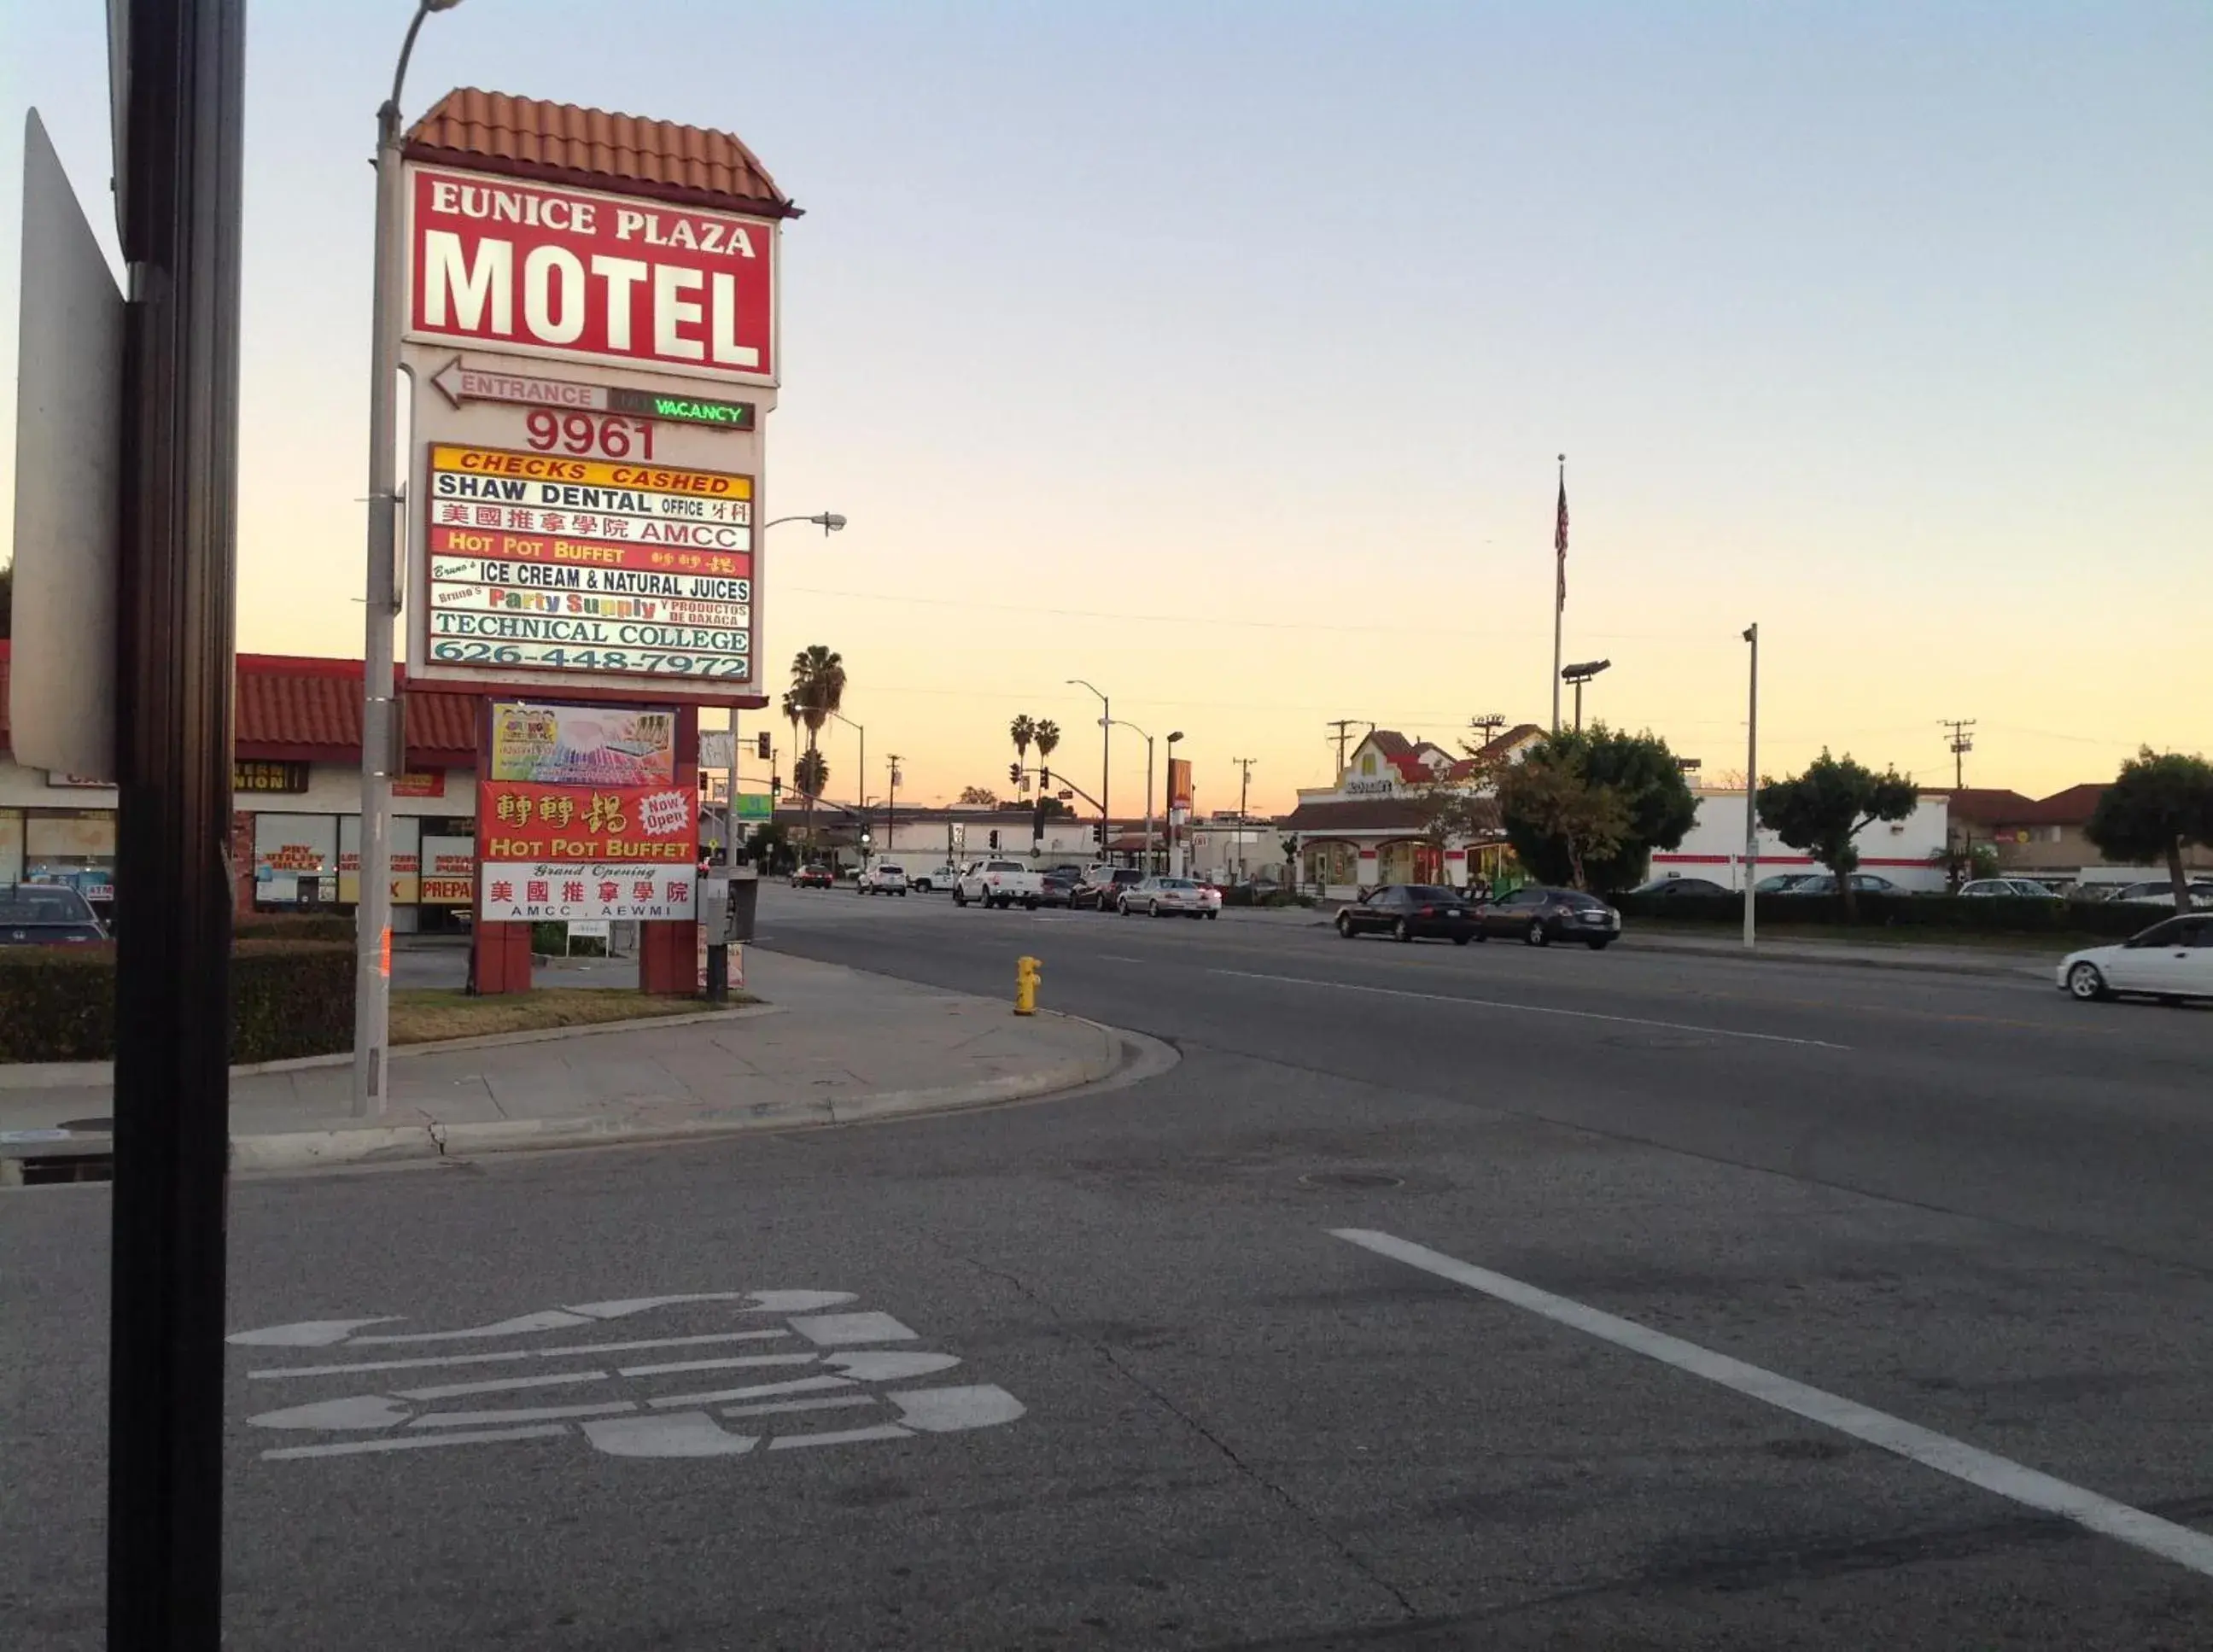 Off site in Eunice Plaza Motel